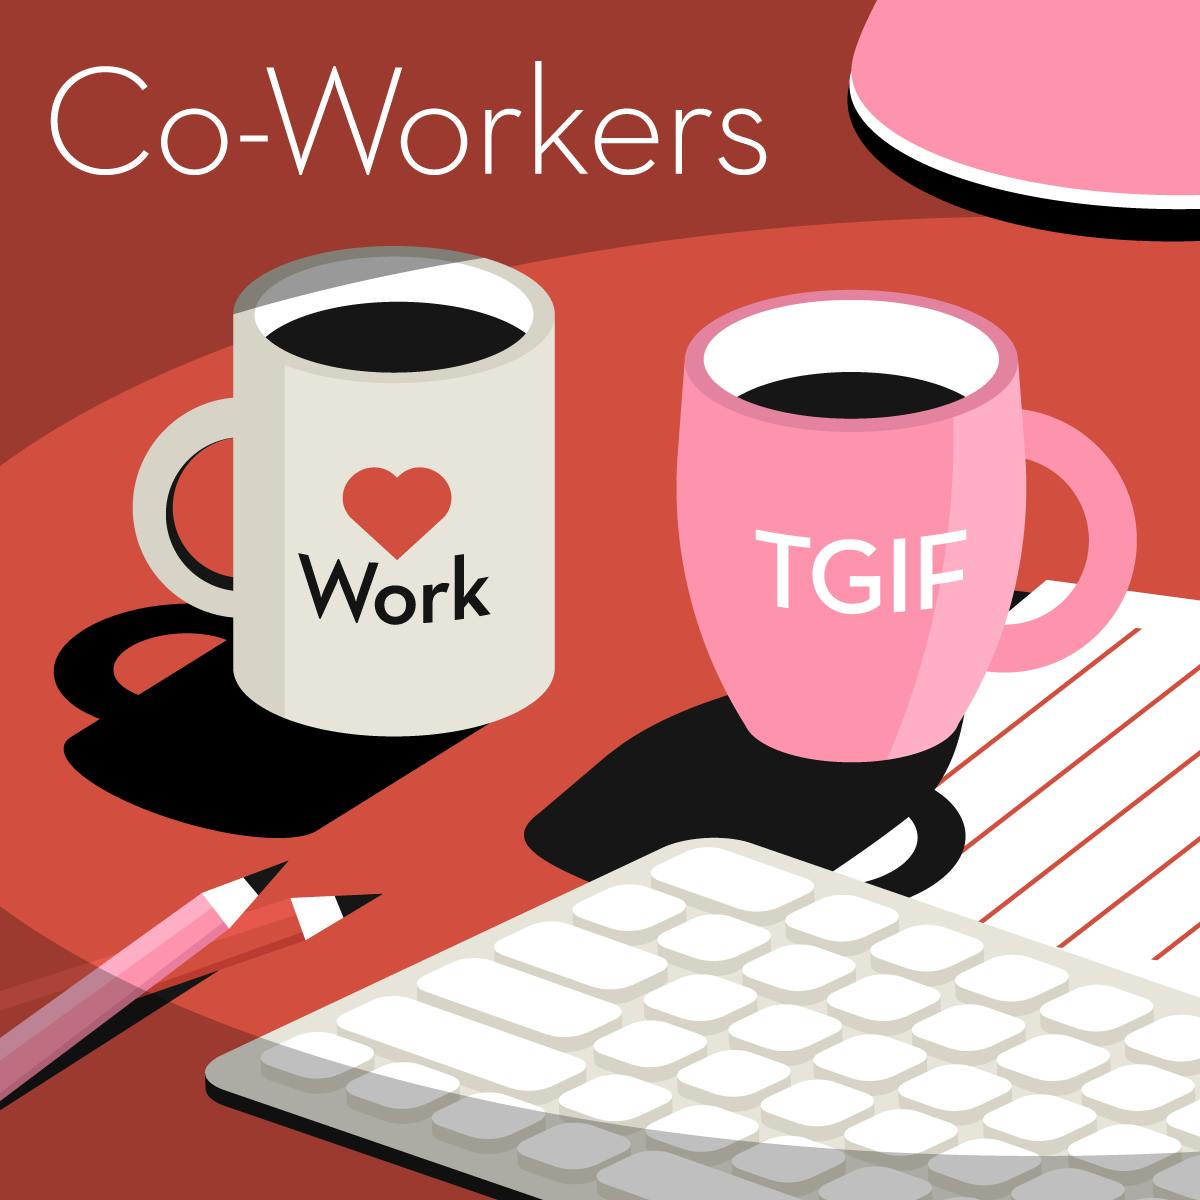 Illustration of a gift guide for co-workers, showing a mug that says “Heart Work” and another that says “TGIF.” Also shown are a keyboard and two pencils.